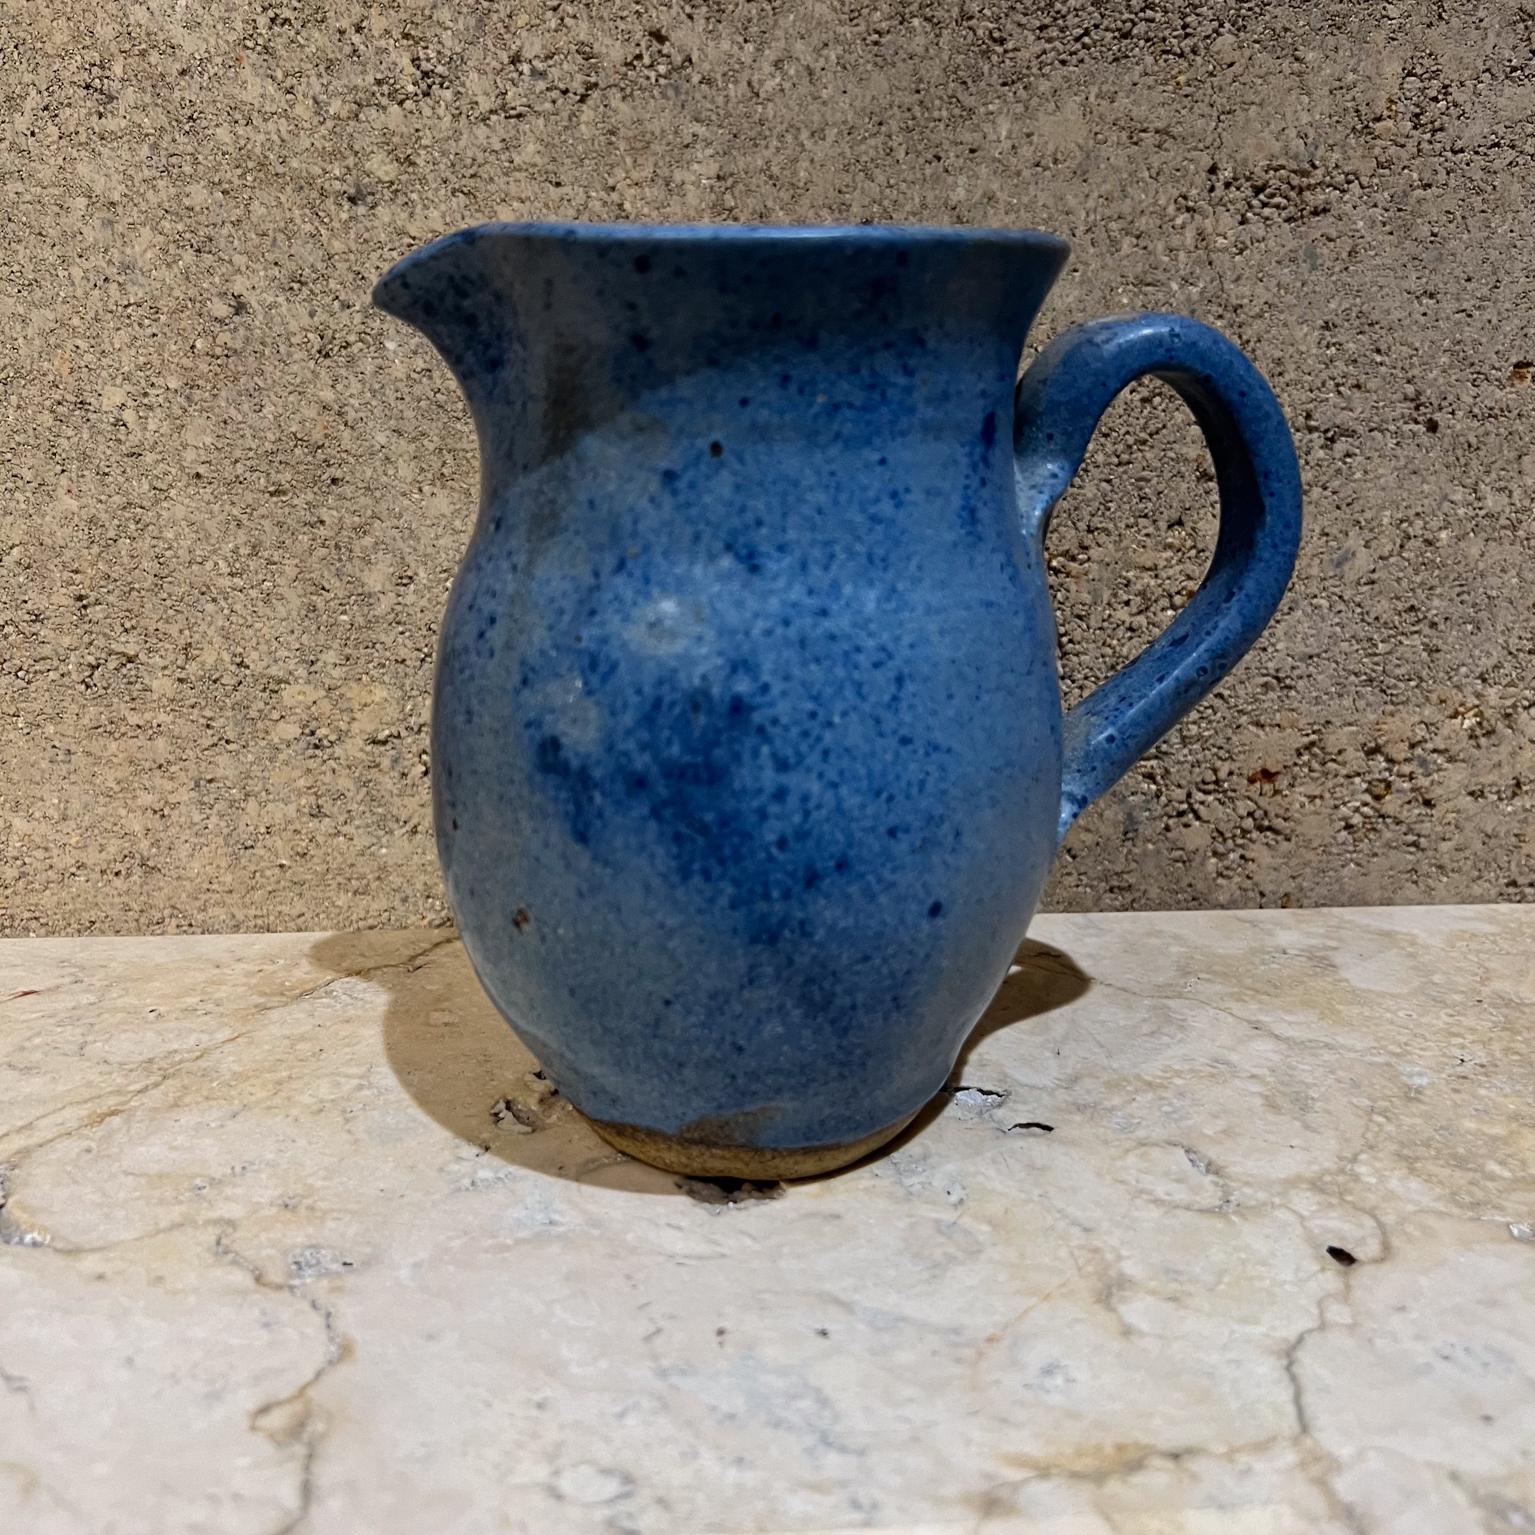 
Art Pottery Blue Stoneware Pitcher
signed
5.75 h x 6 d x 4 diameter
Preowned Vintage
Refer to images
